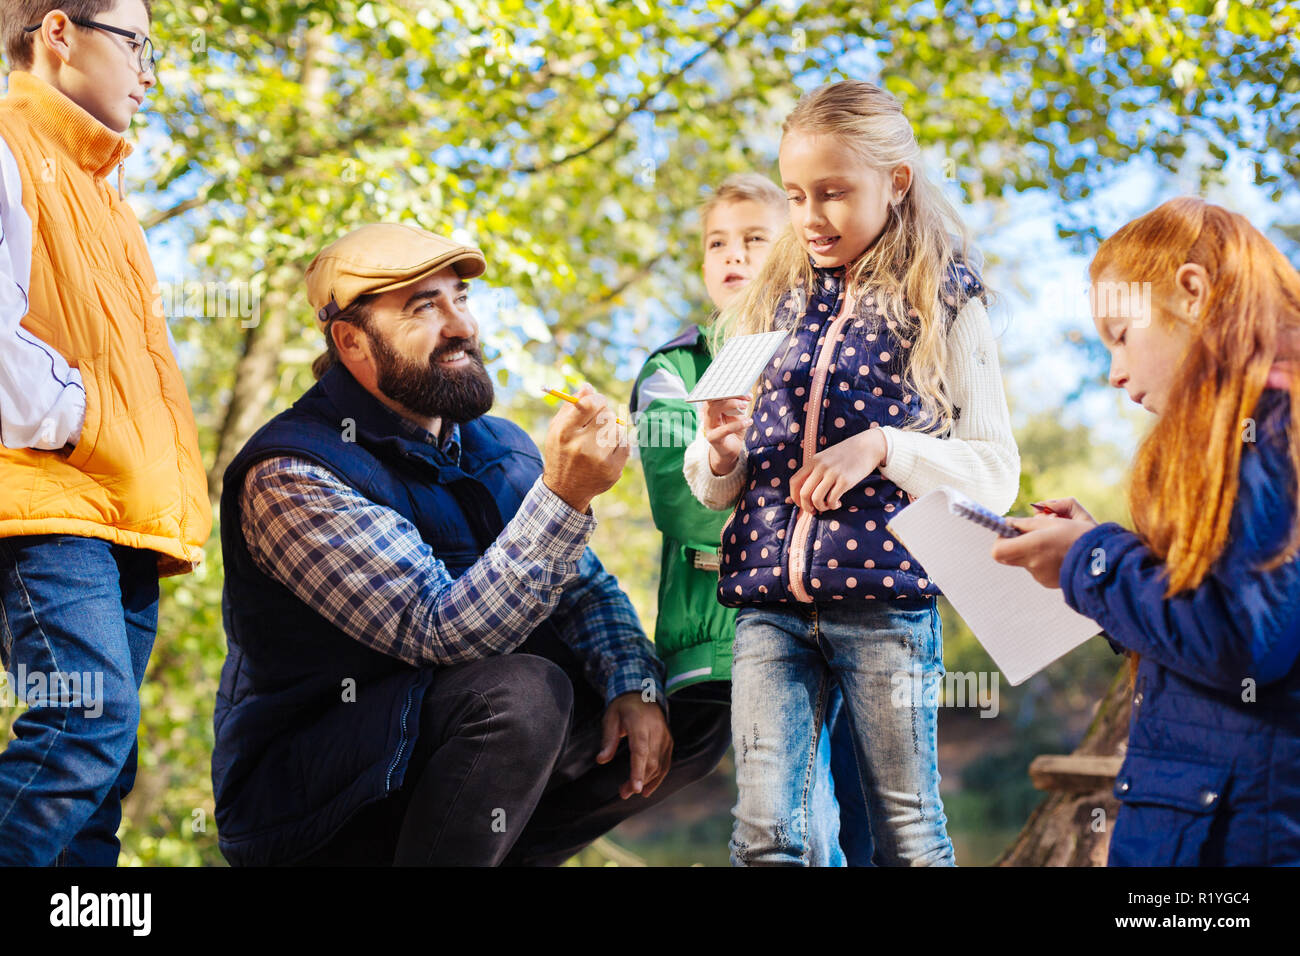 Delighted bearded man sitting in the circle of children Stock Photo